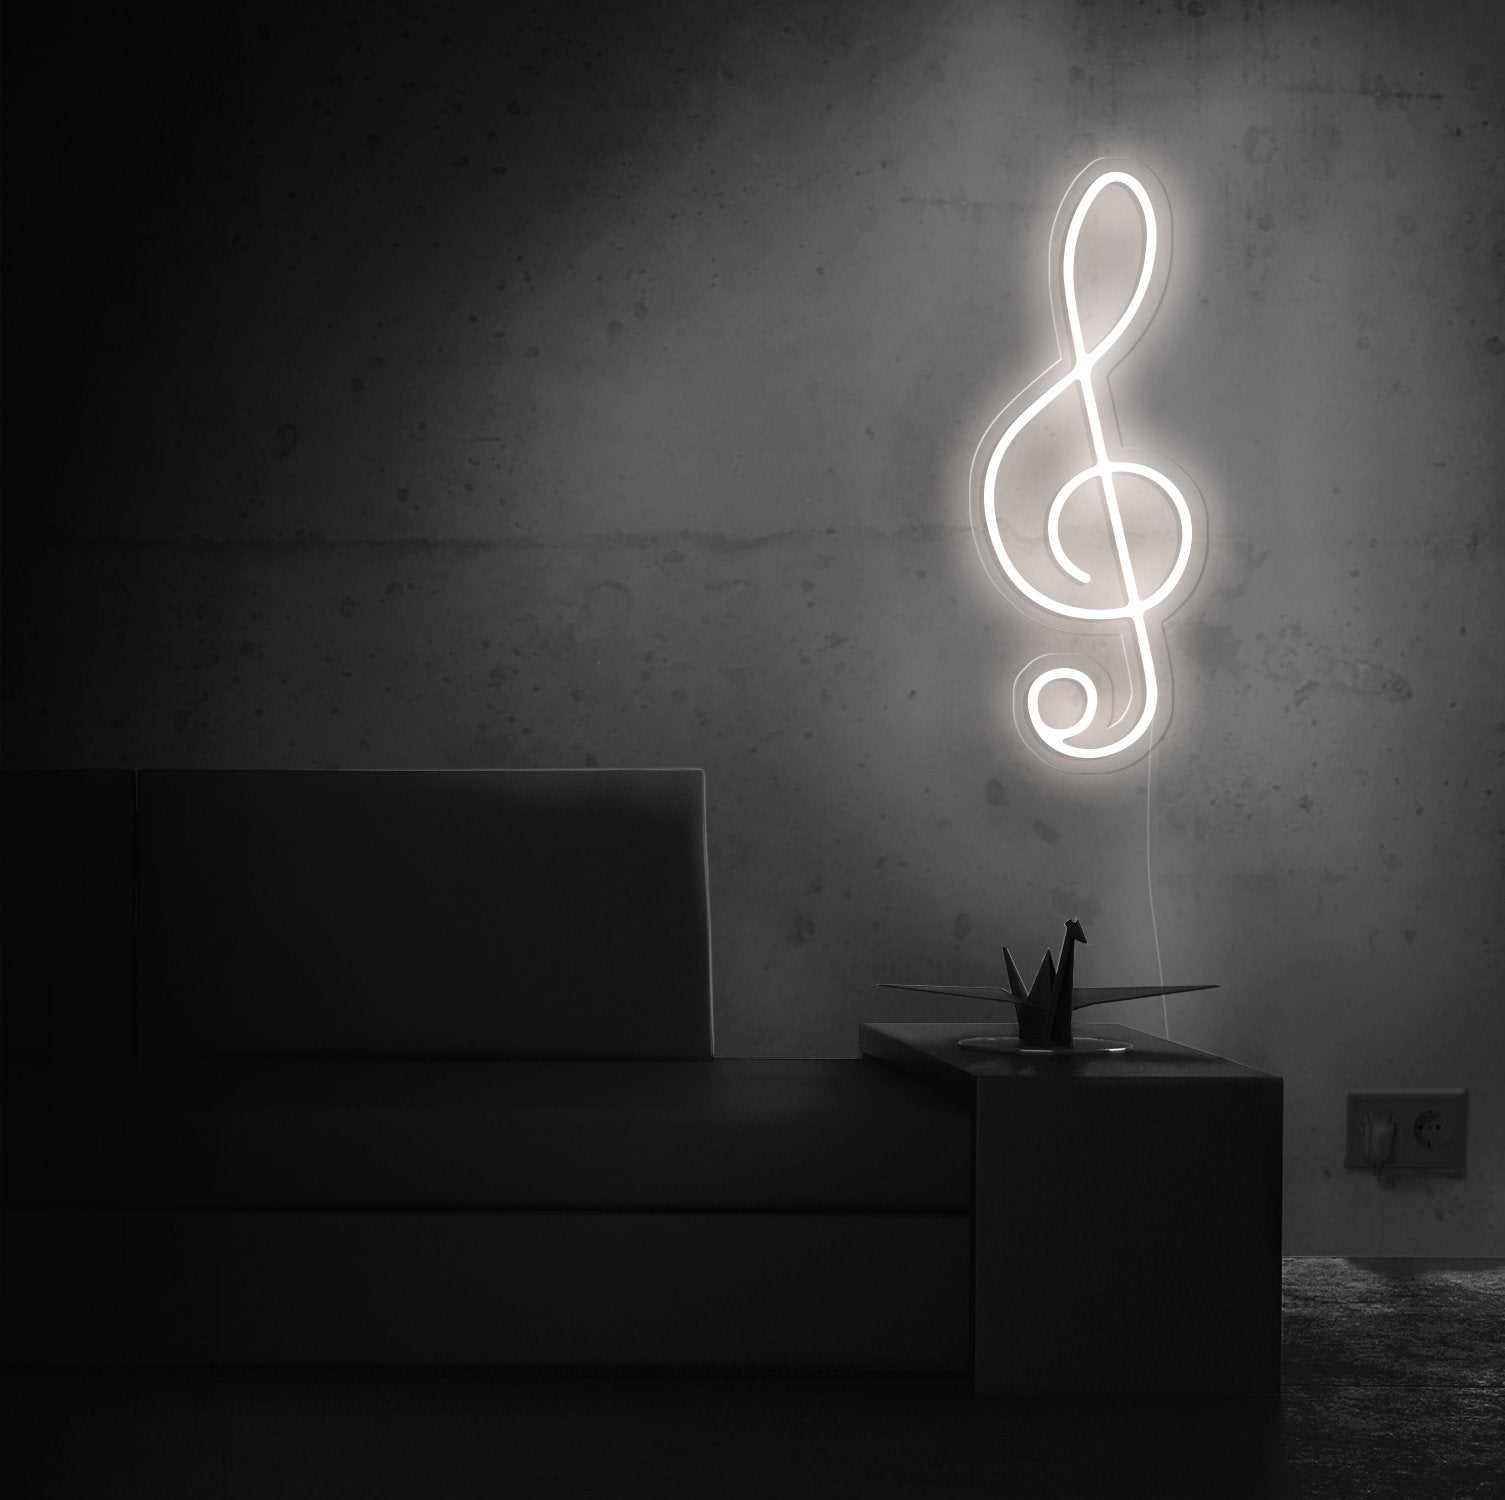 Treble Clef Musical Note Neon Sign - NeonFerry